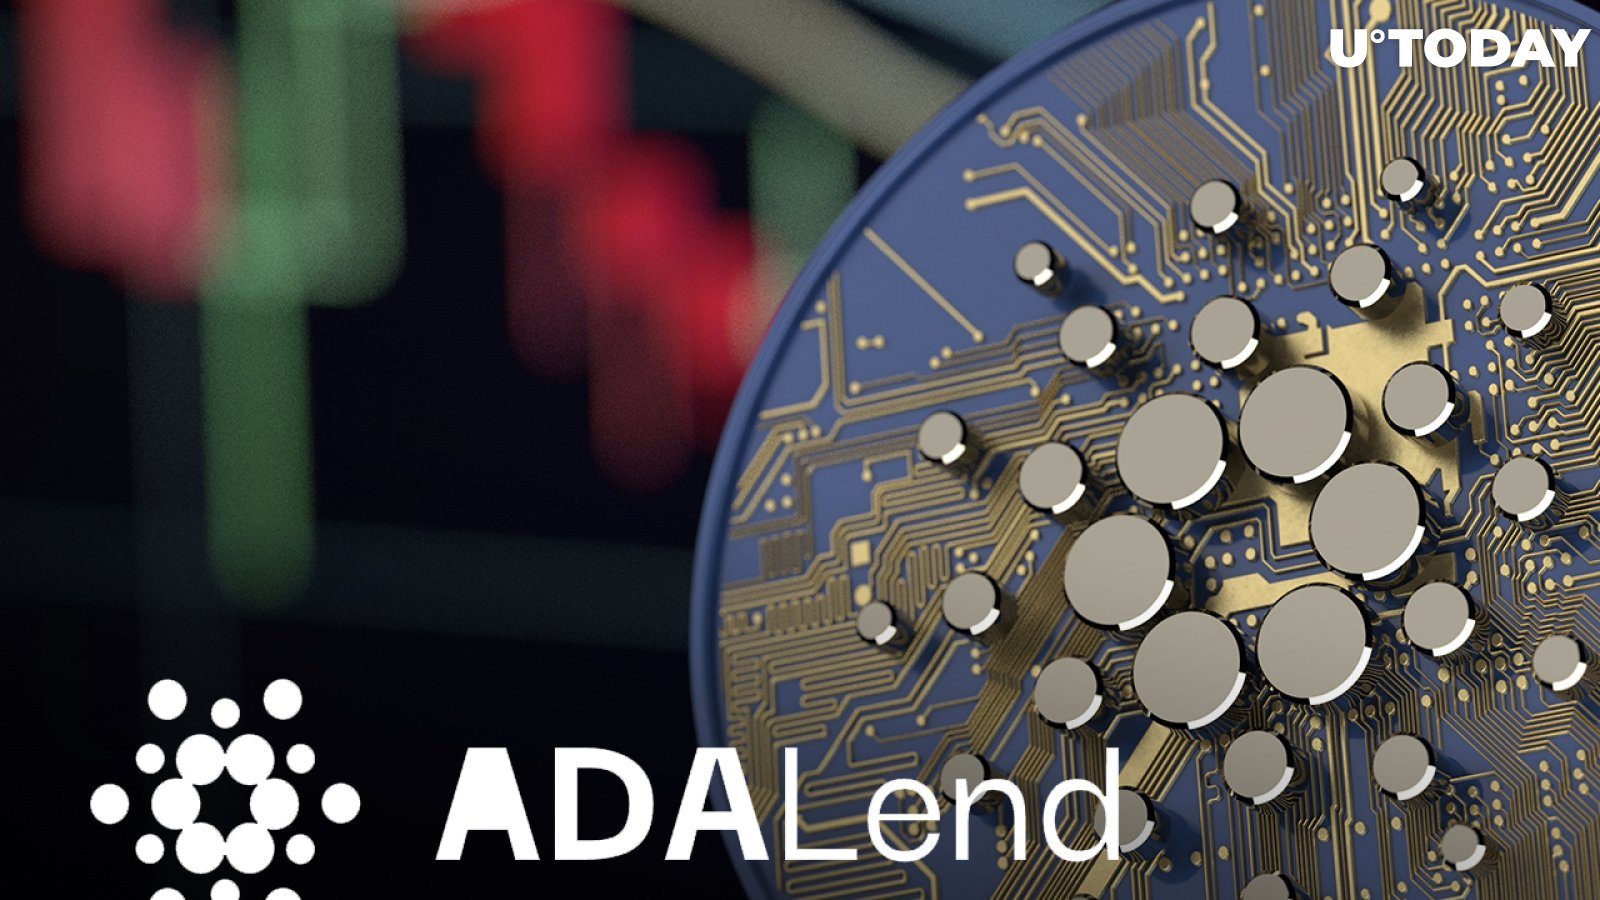 Cardano-Based ADALend Scores Partnership with Robatz Network to Build Decentralized Lending Protocol